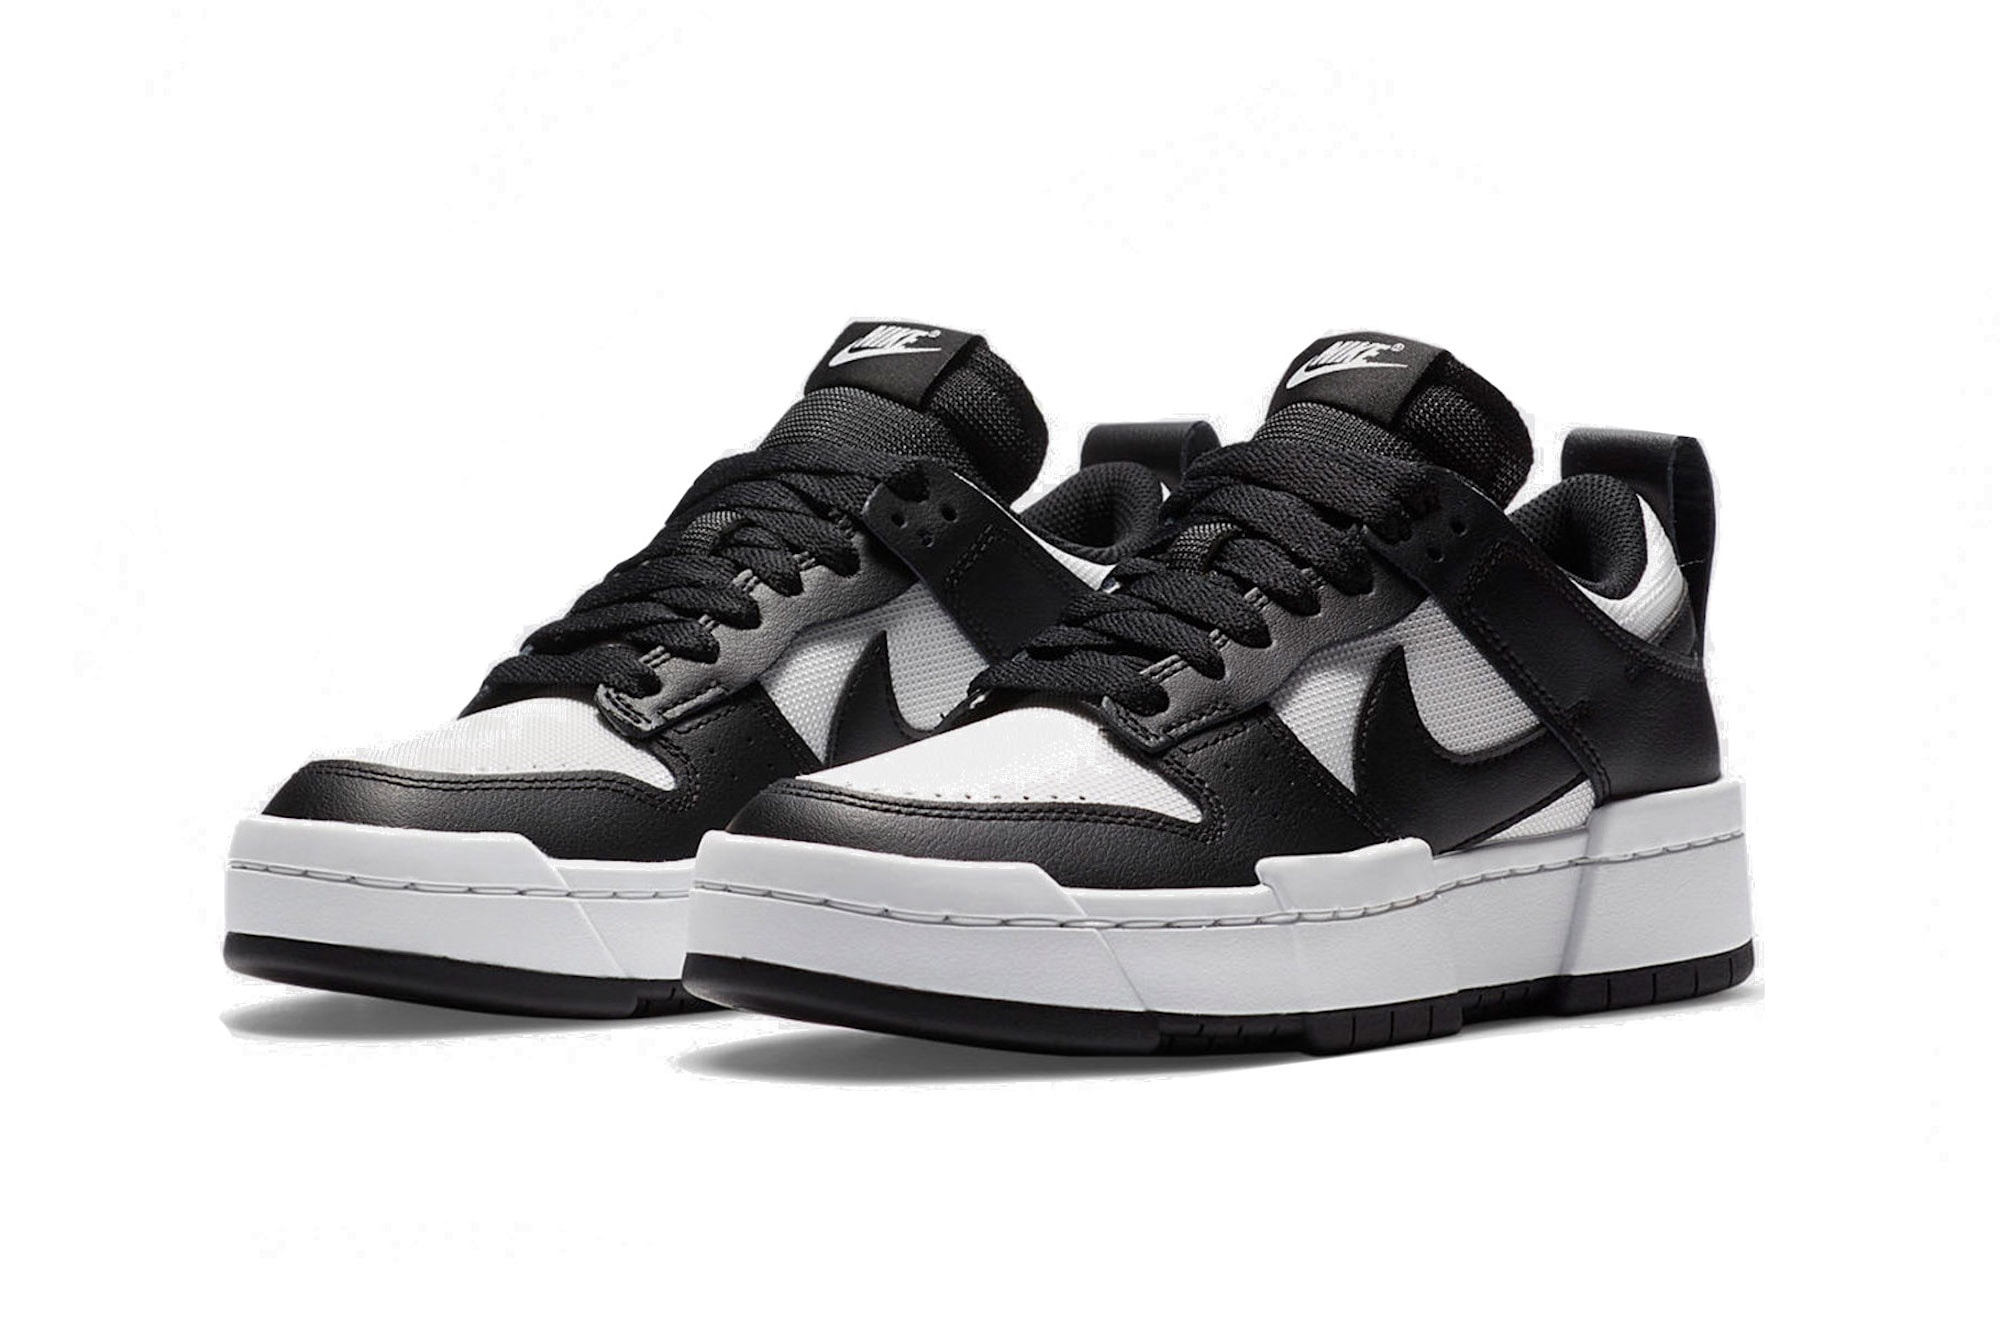 Nike Dunk Disrupt Black and White Release Shoe Sneaker Price